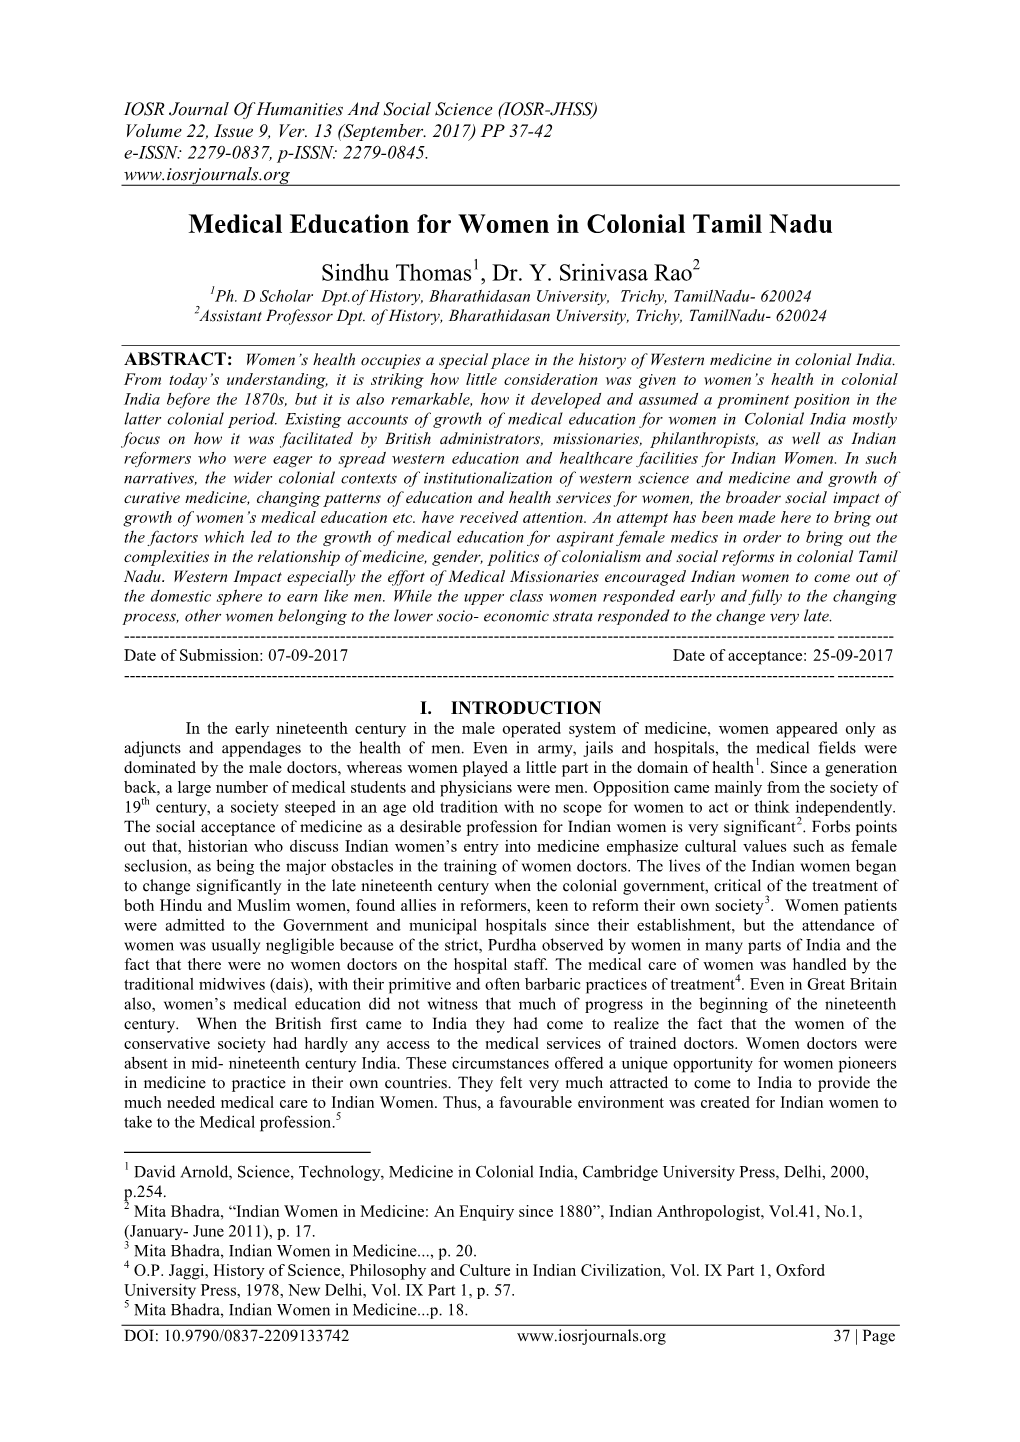 Medical Education for Women in Colonial Tamil Nadu